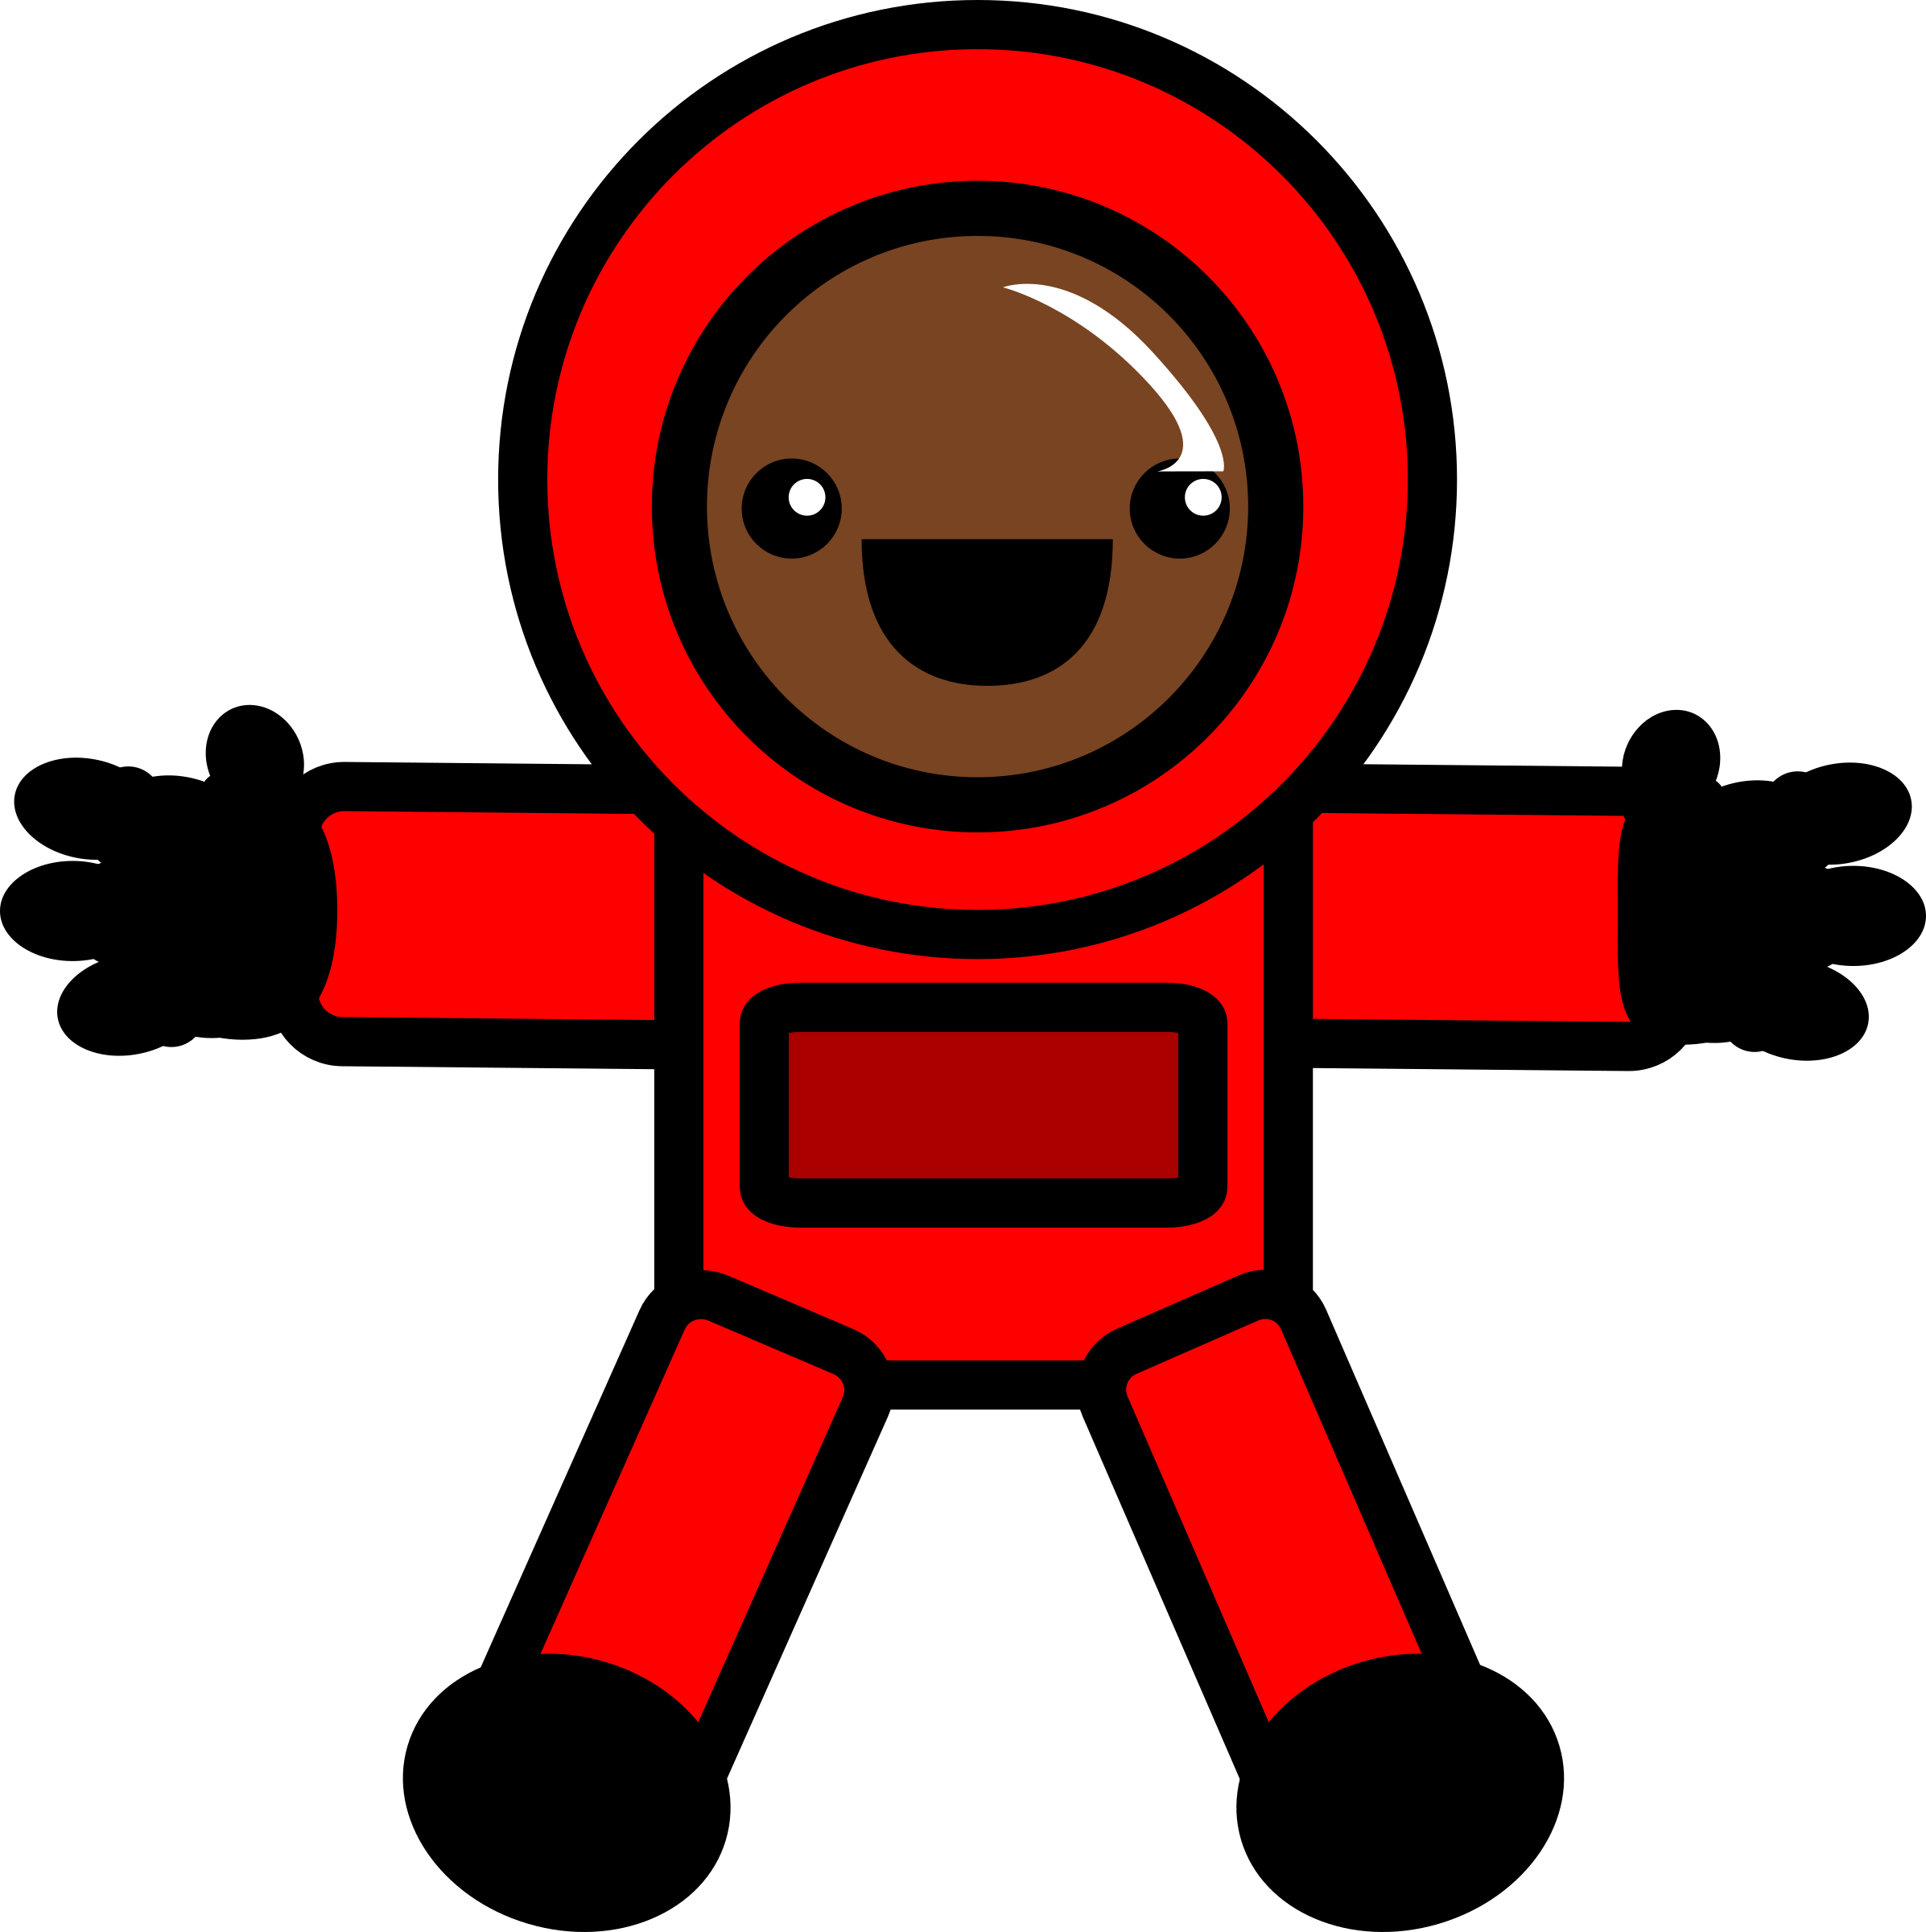 Astronaut in Red Space Suit vector clipart image - Free stock 